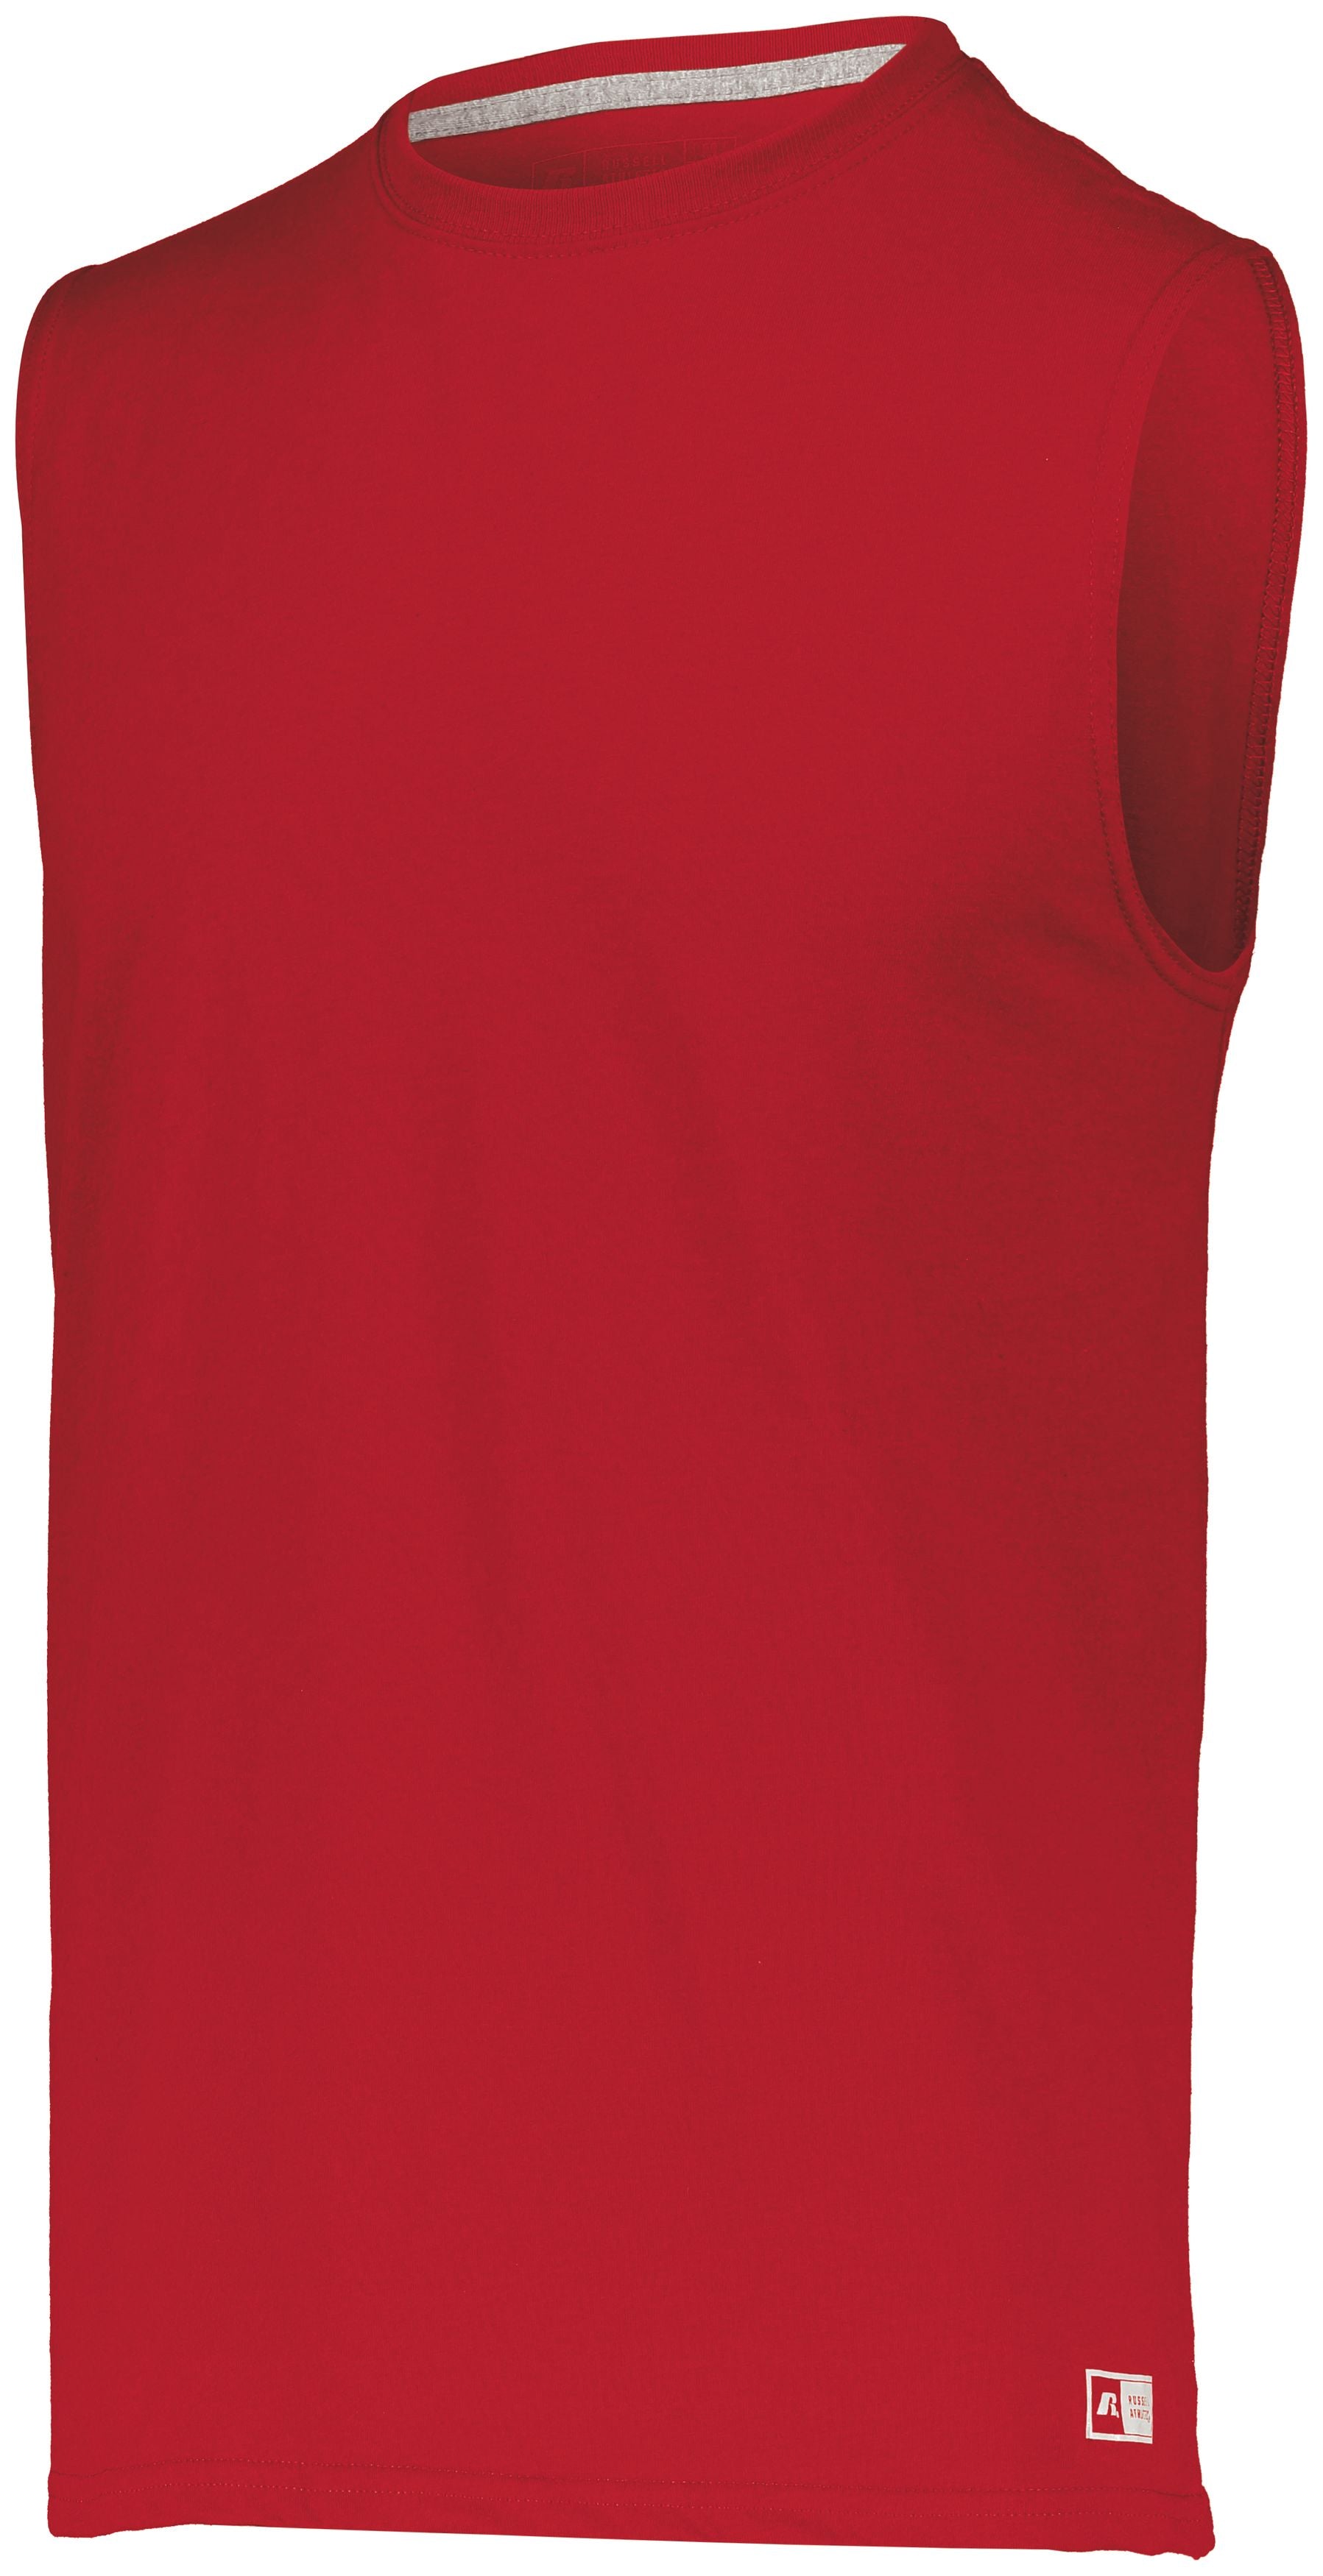 Russell Athletic Essential Muscle Tee in True Red  -Part of the Adult, Adult-Tee-Shirt, T-Shirts, Russell-Athletic-Products, Shirts product lines at KanaleyCreations.com